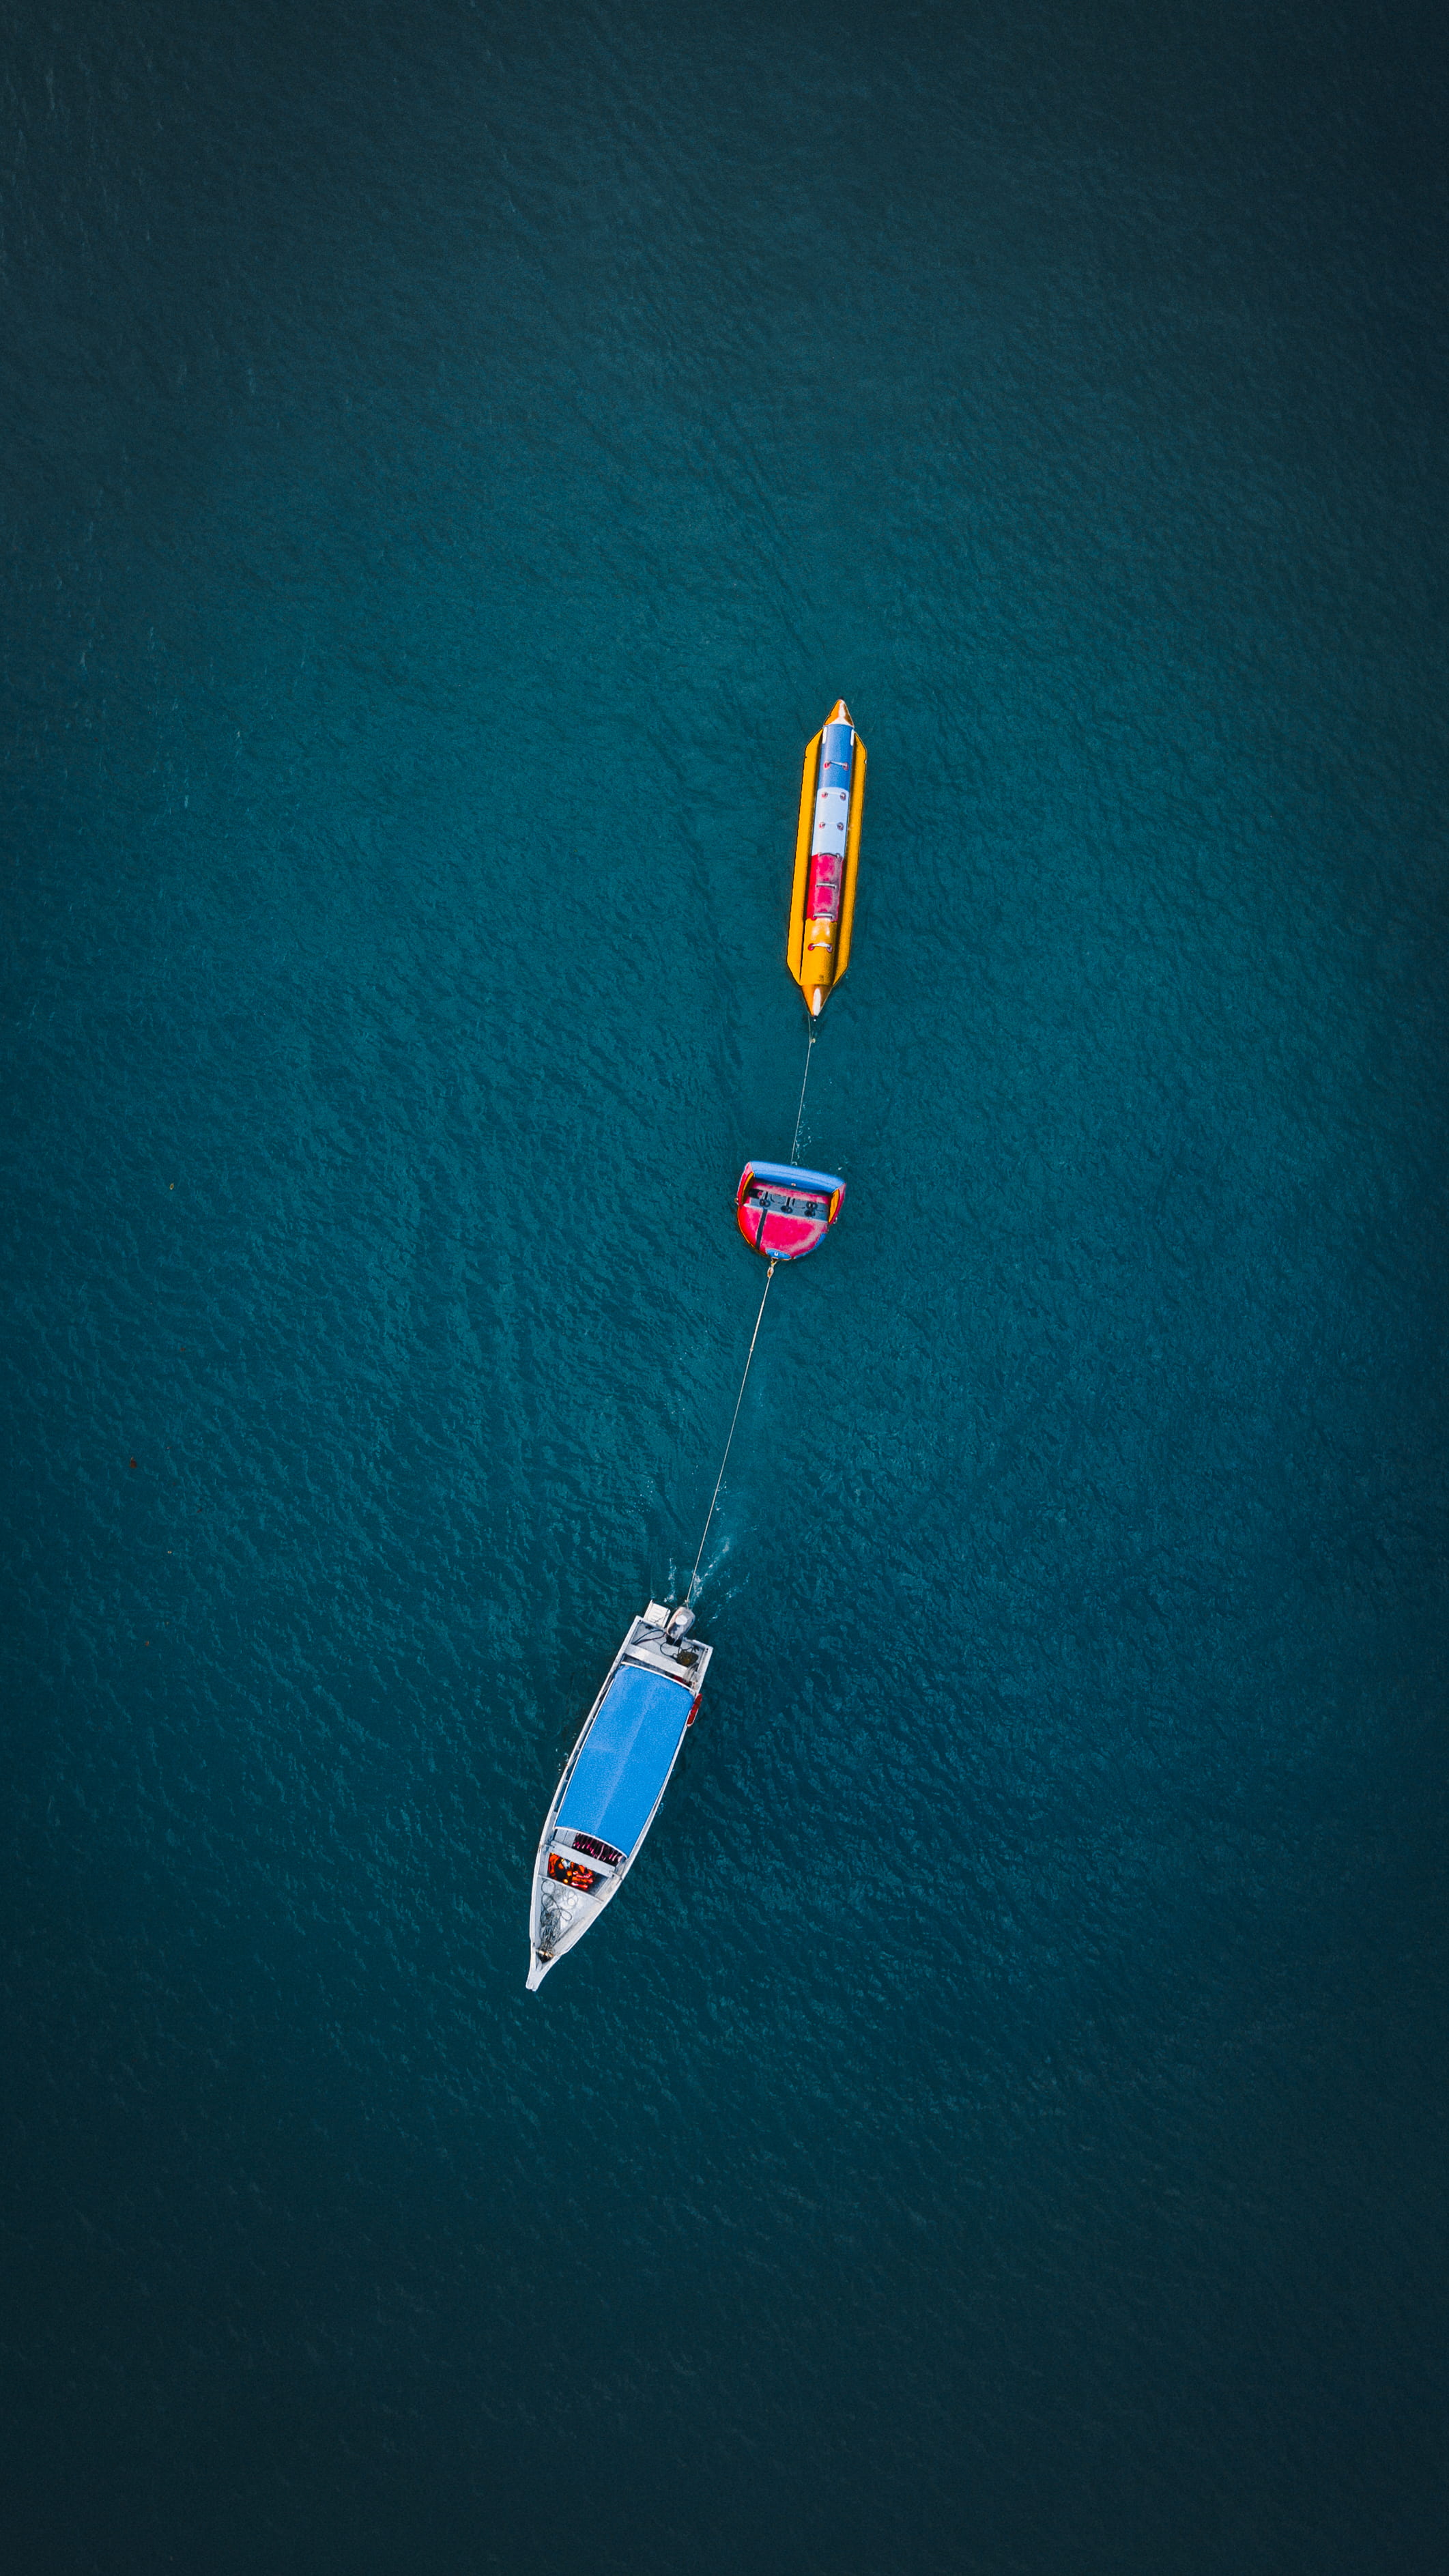 white and yellow boats on body of water, aerial view of boat pulling banana boat